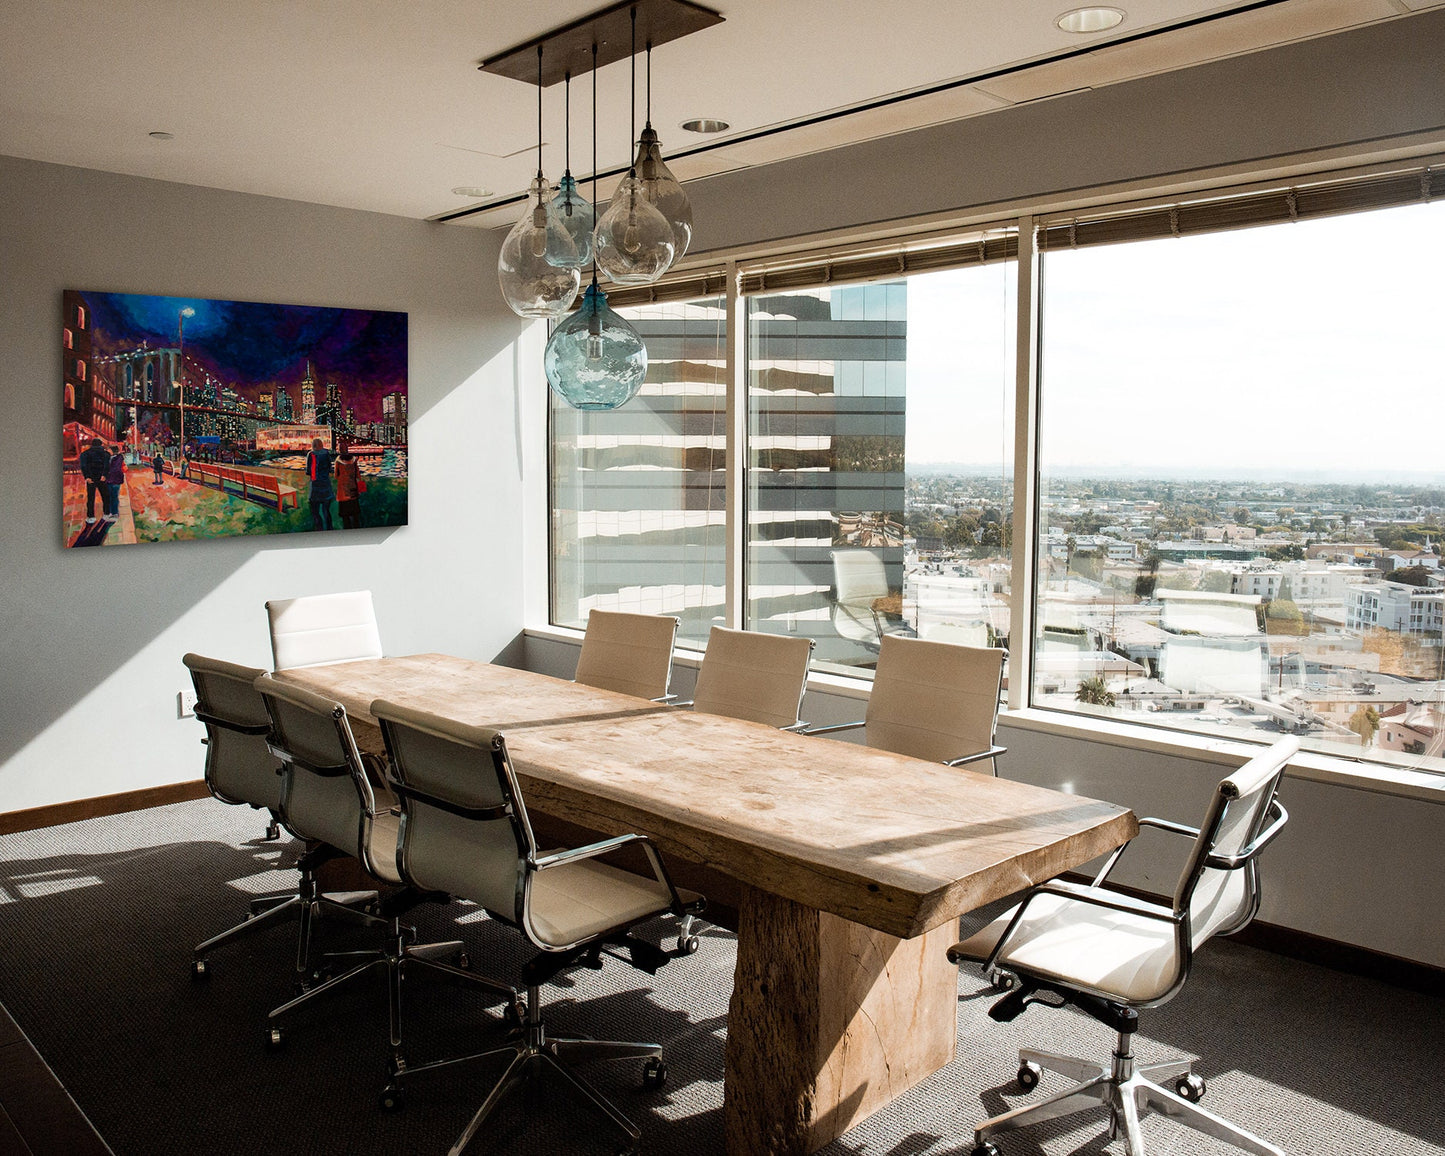 New York city skyline painting in downtown office setting